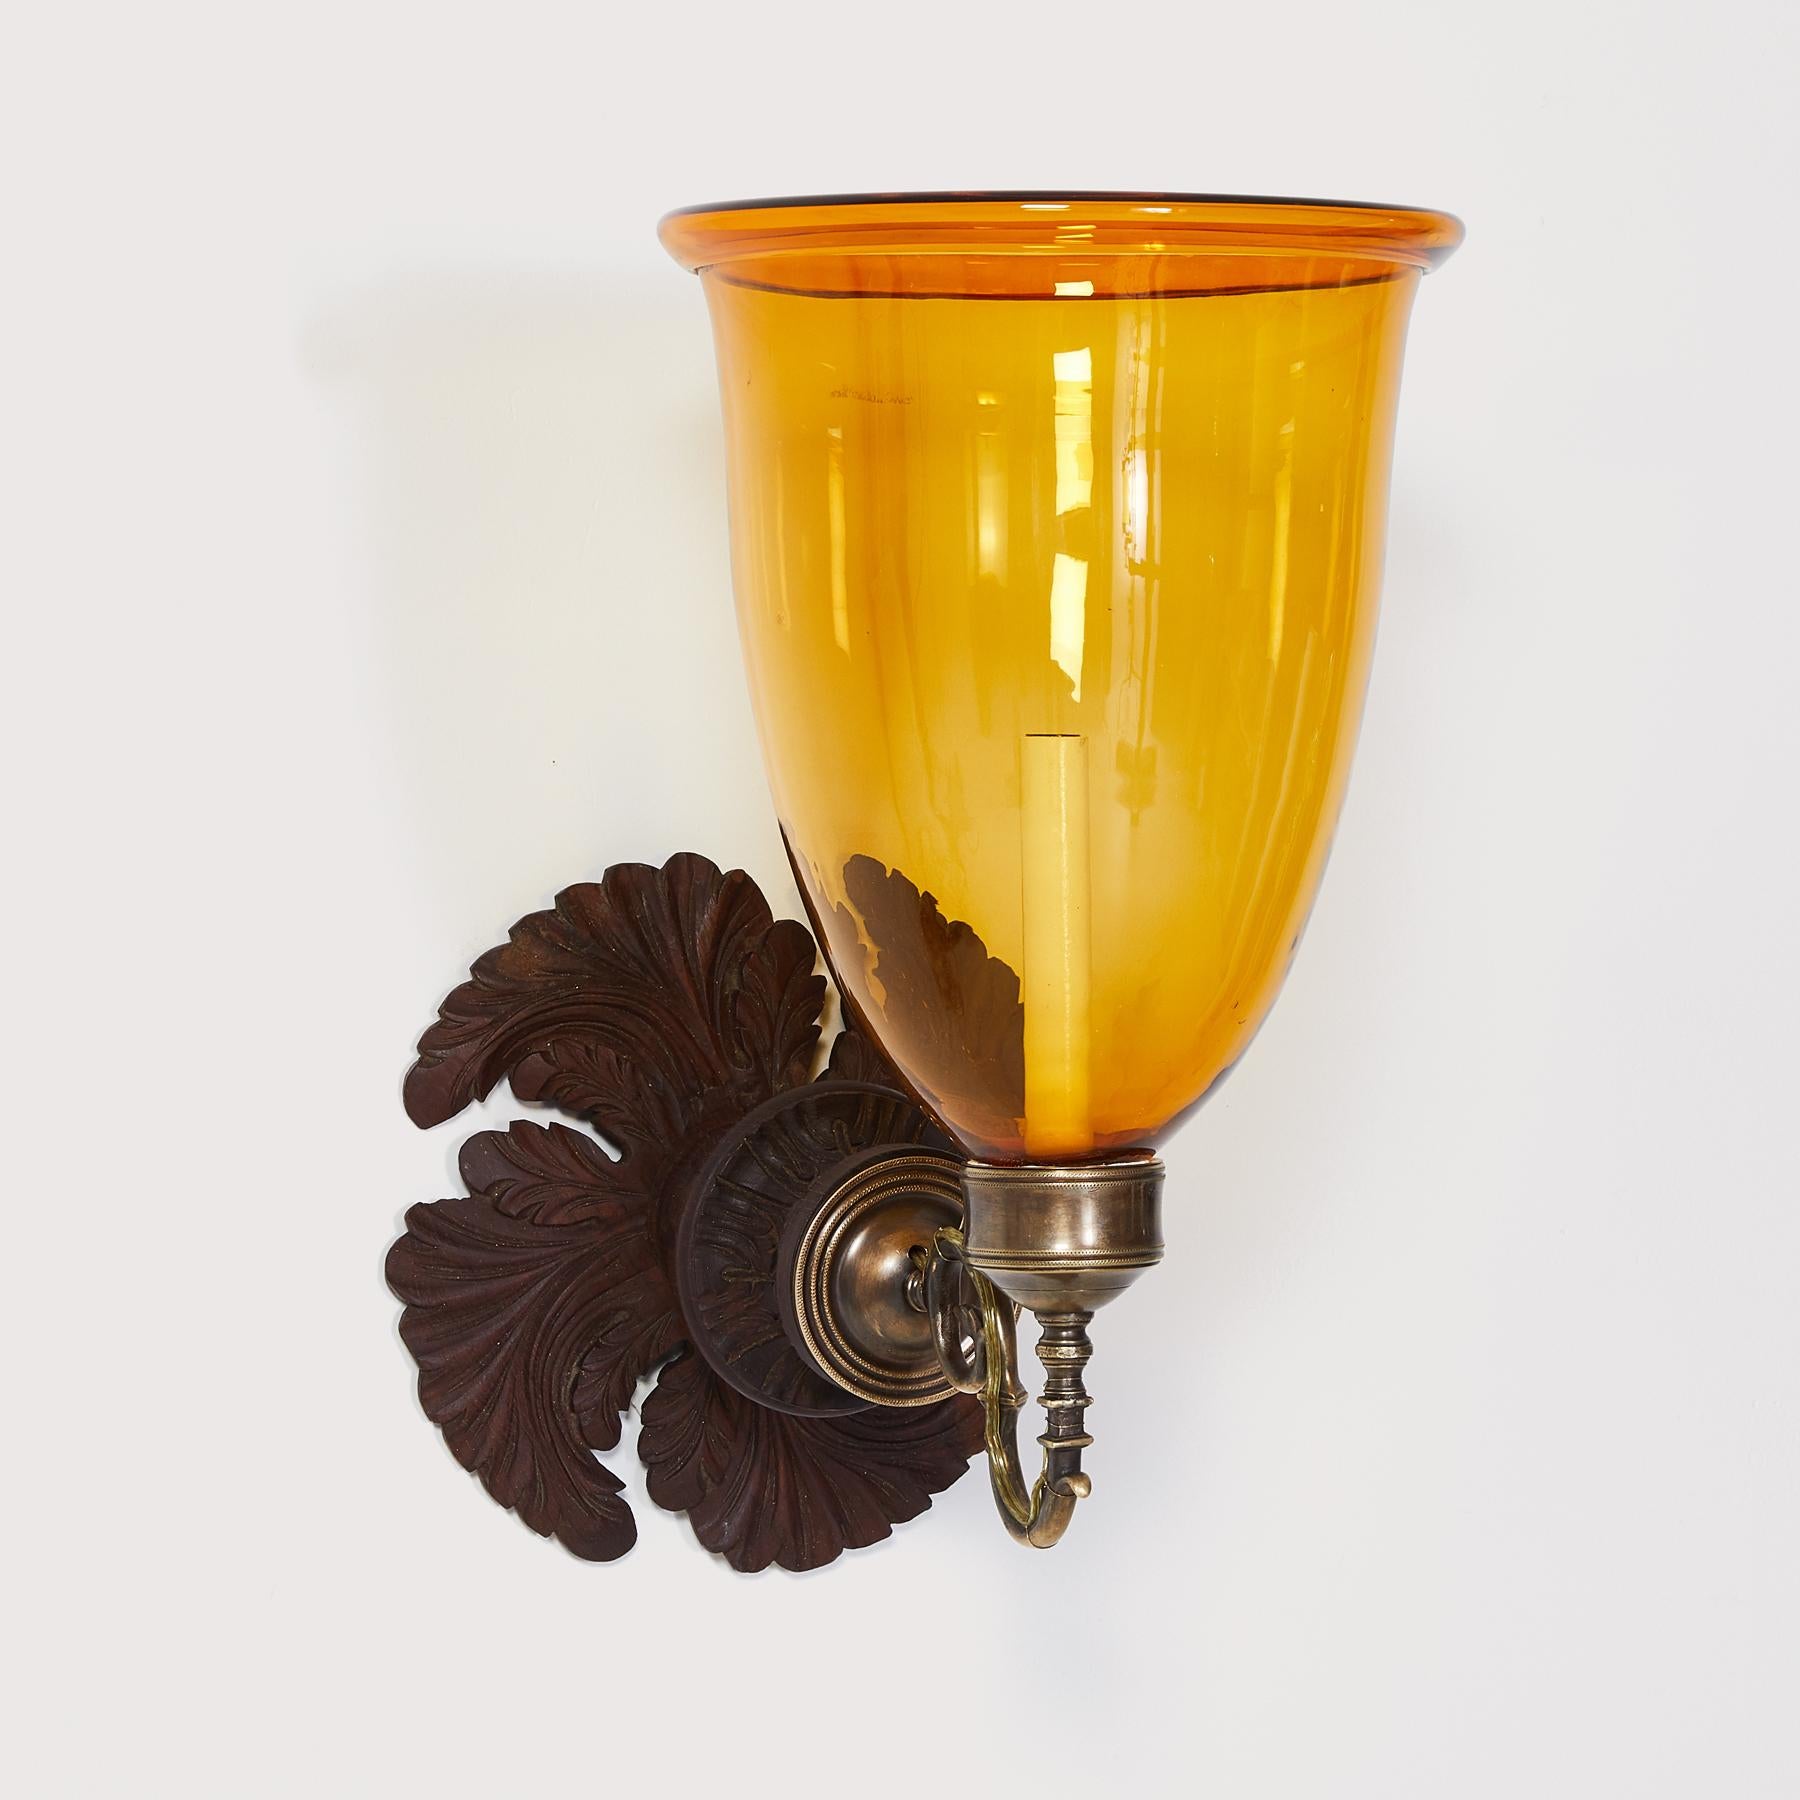 A pair of early 20th century hand-carved mahogany Anglo Indian styled backplate with patinated brass sconce fittings and rare hand blown amber glass hurricane shades. Electrified with one candelabra base socket per sconce.

Our custom hurricane